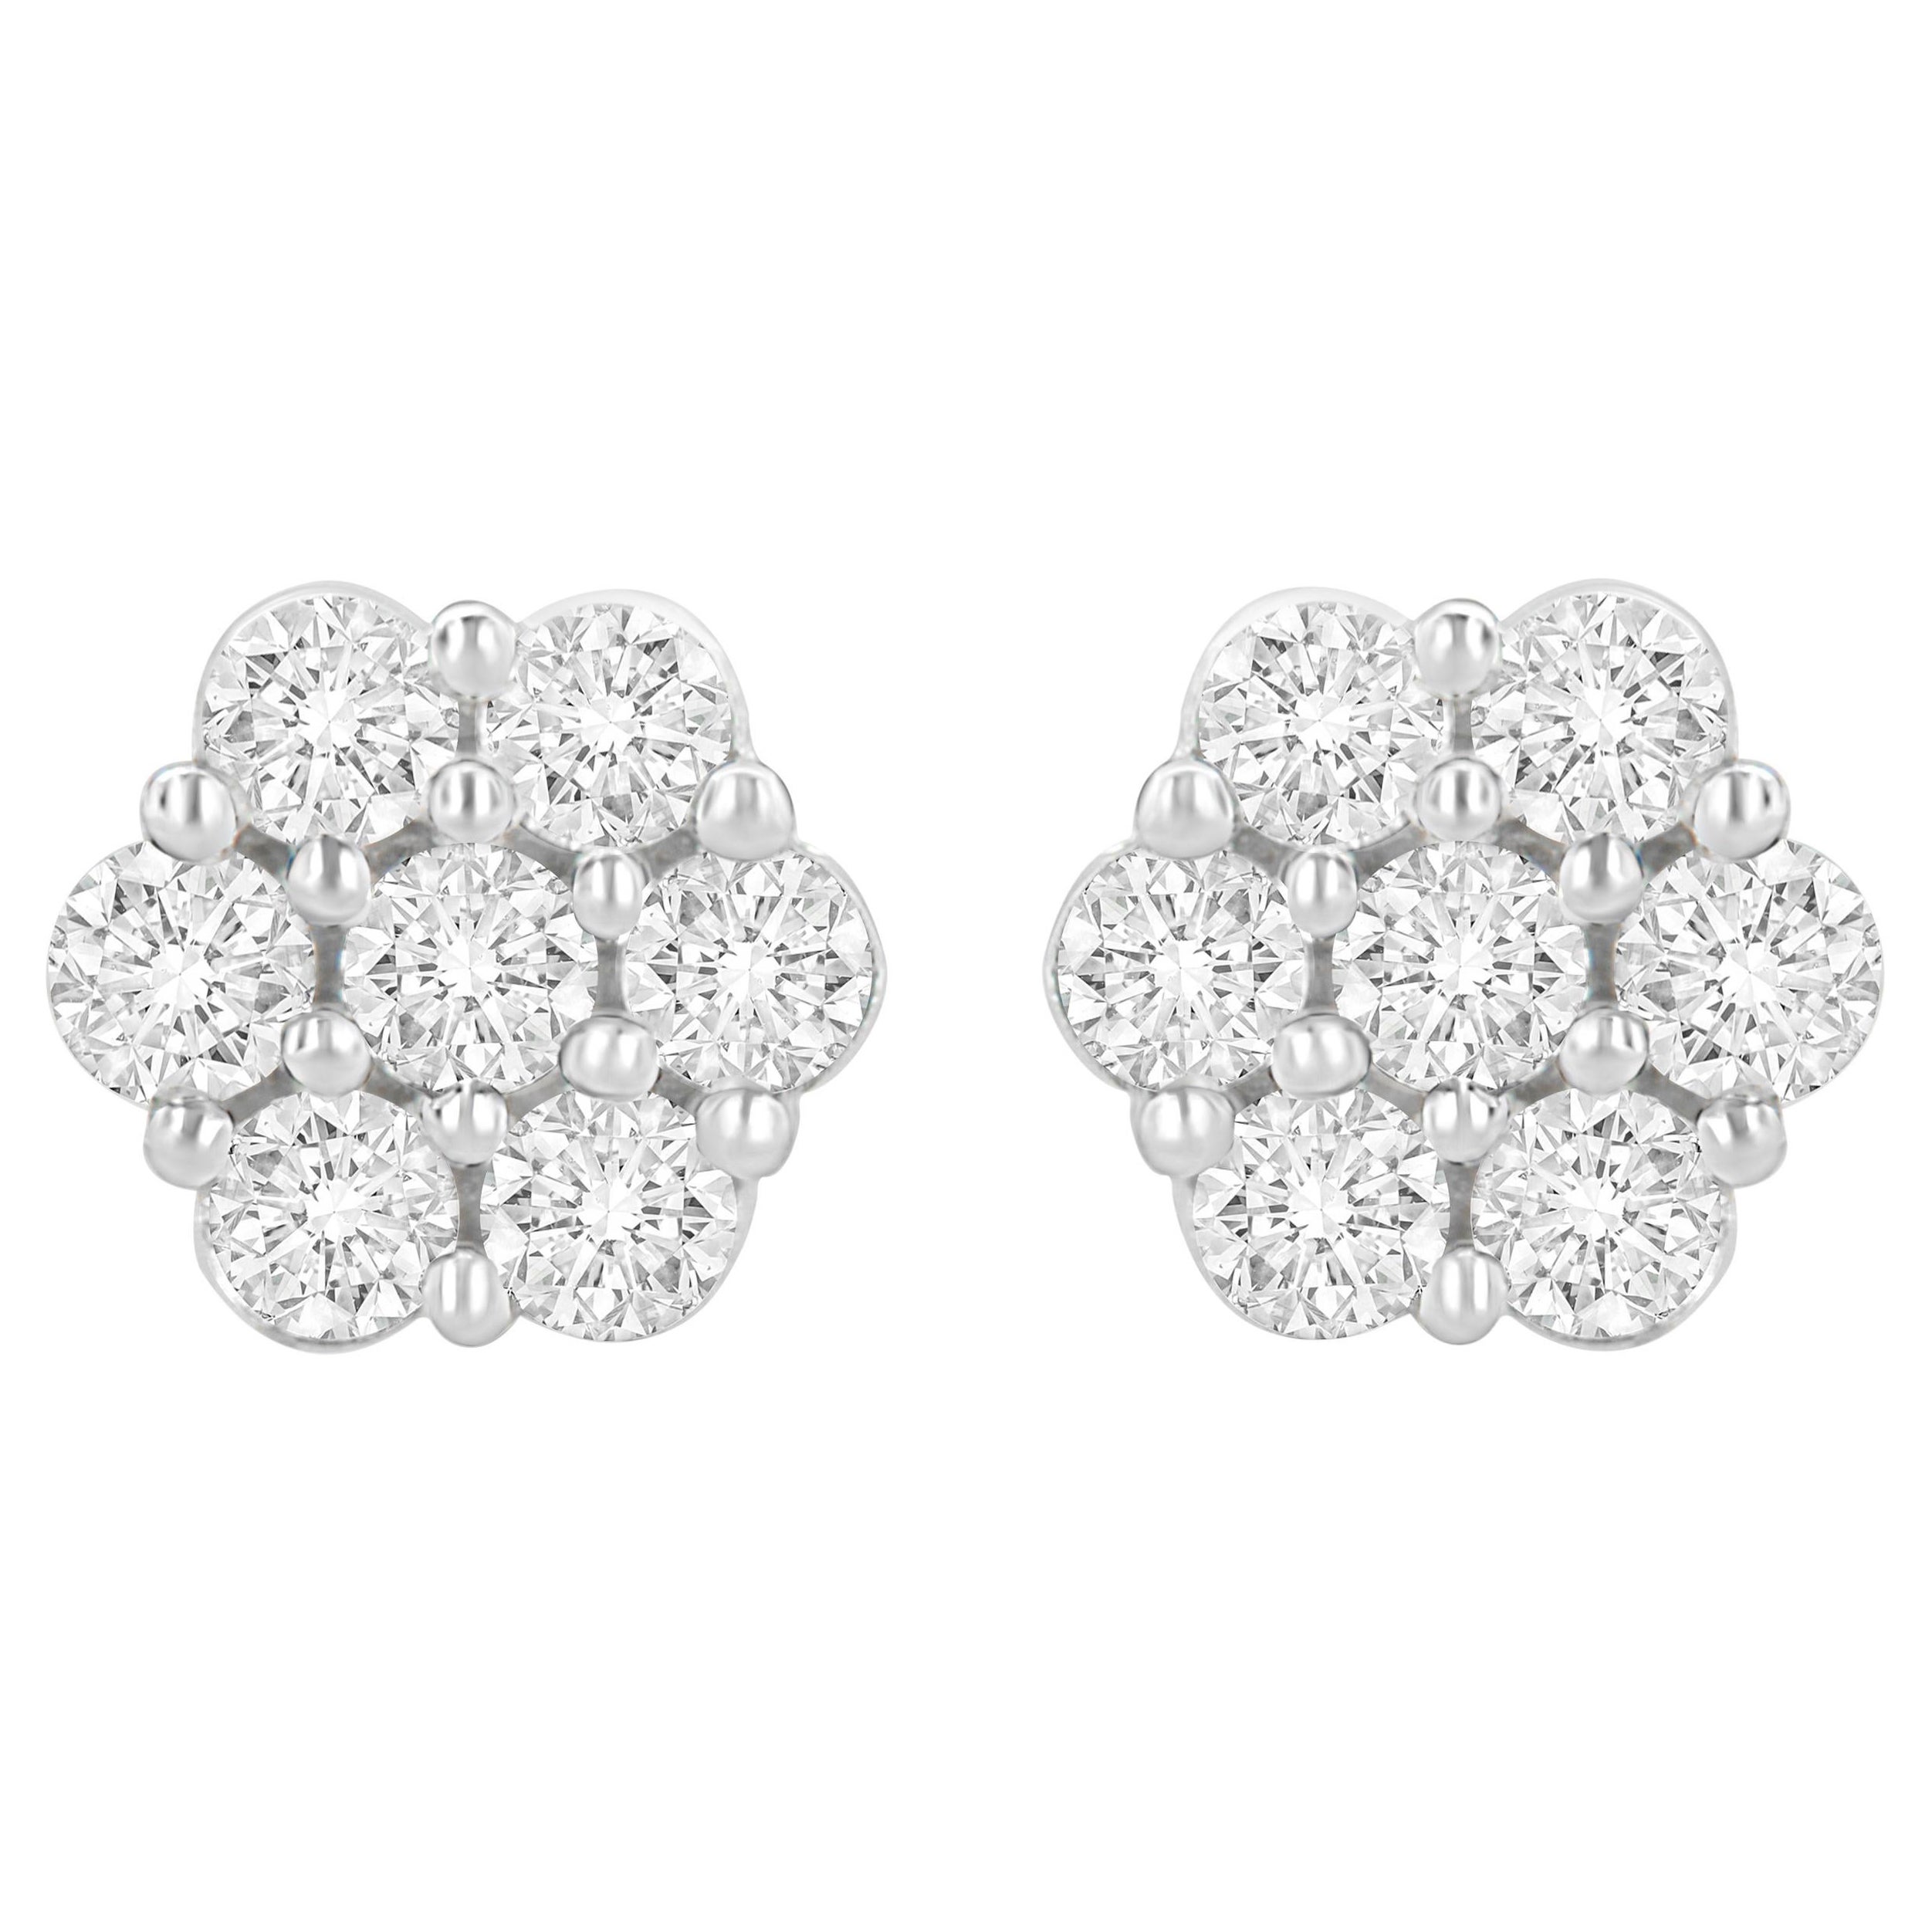 14K White Gold 1.0 Carat Prong Set Round-Cut Diamond Floral Stud Earrings For Sale